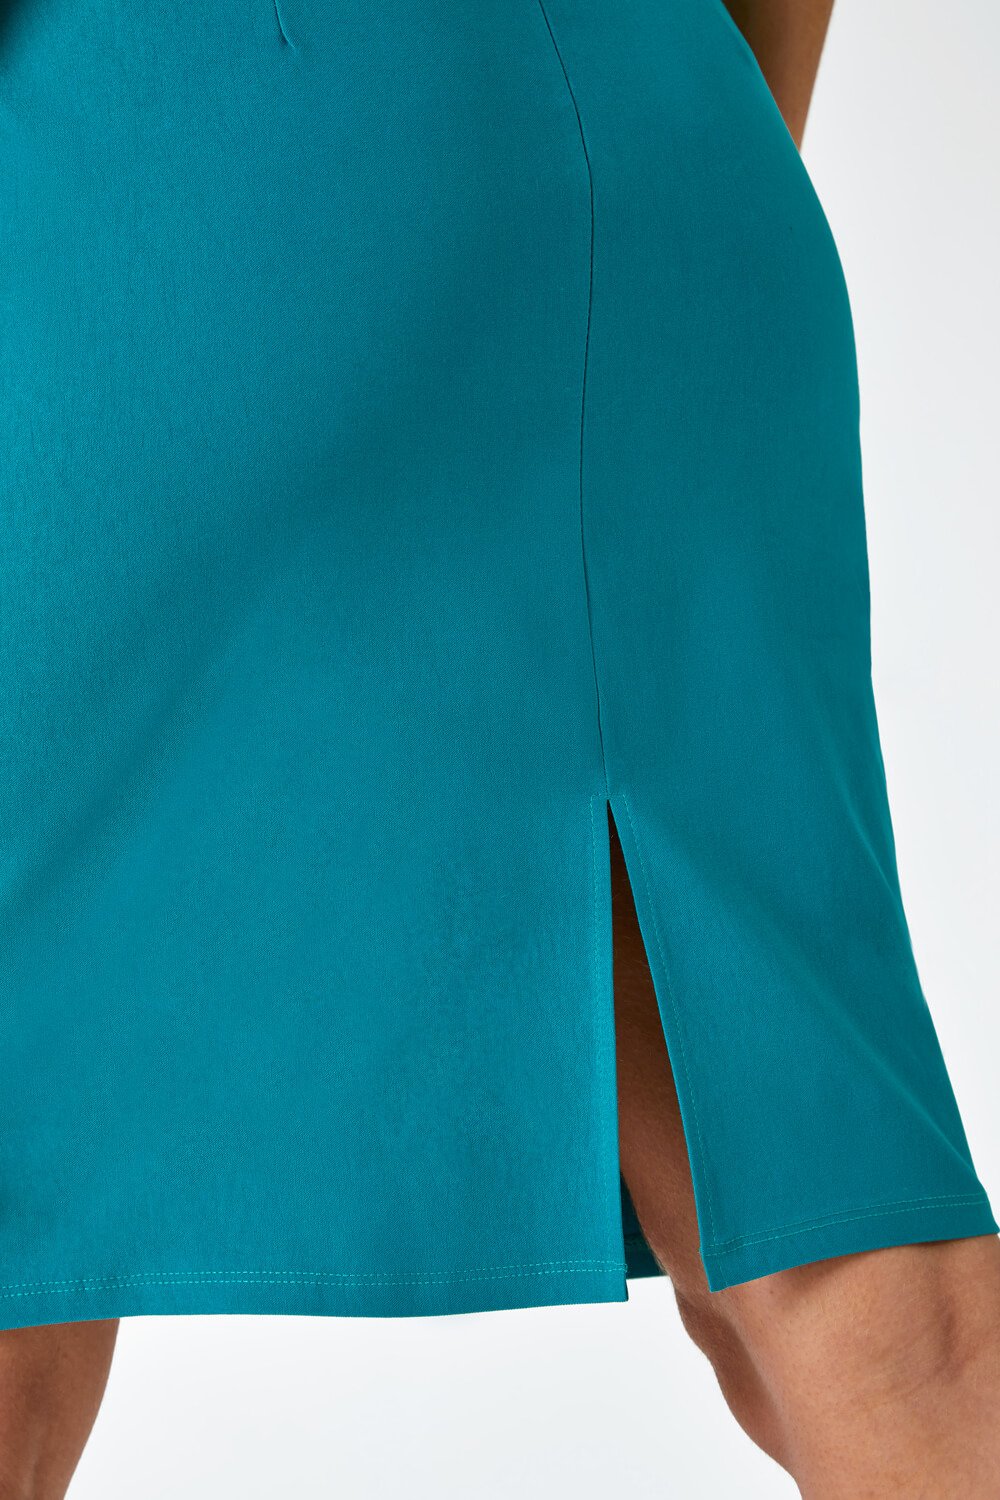 Jade Pull On Stretch Pencil Skirt, Image 5 of 5